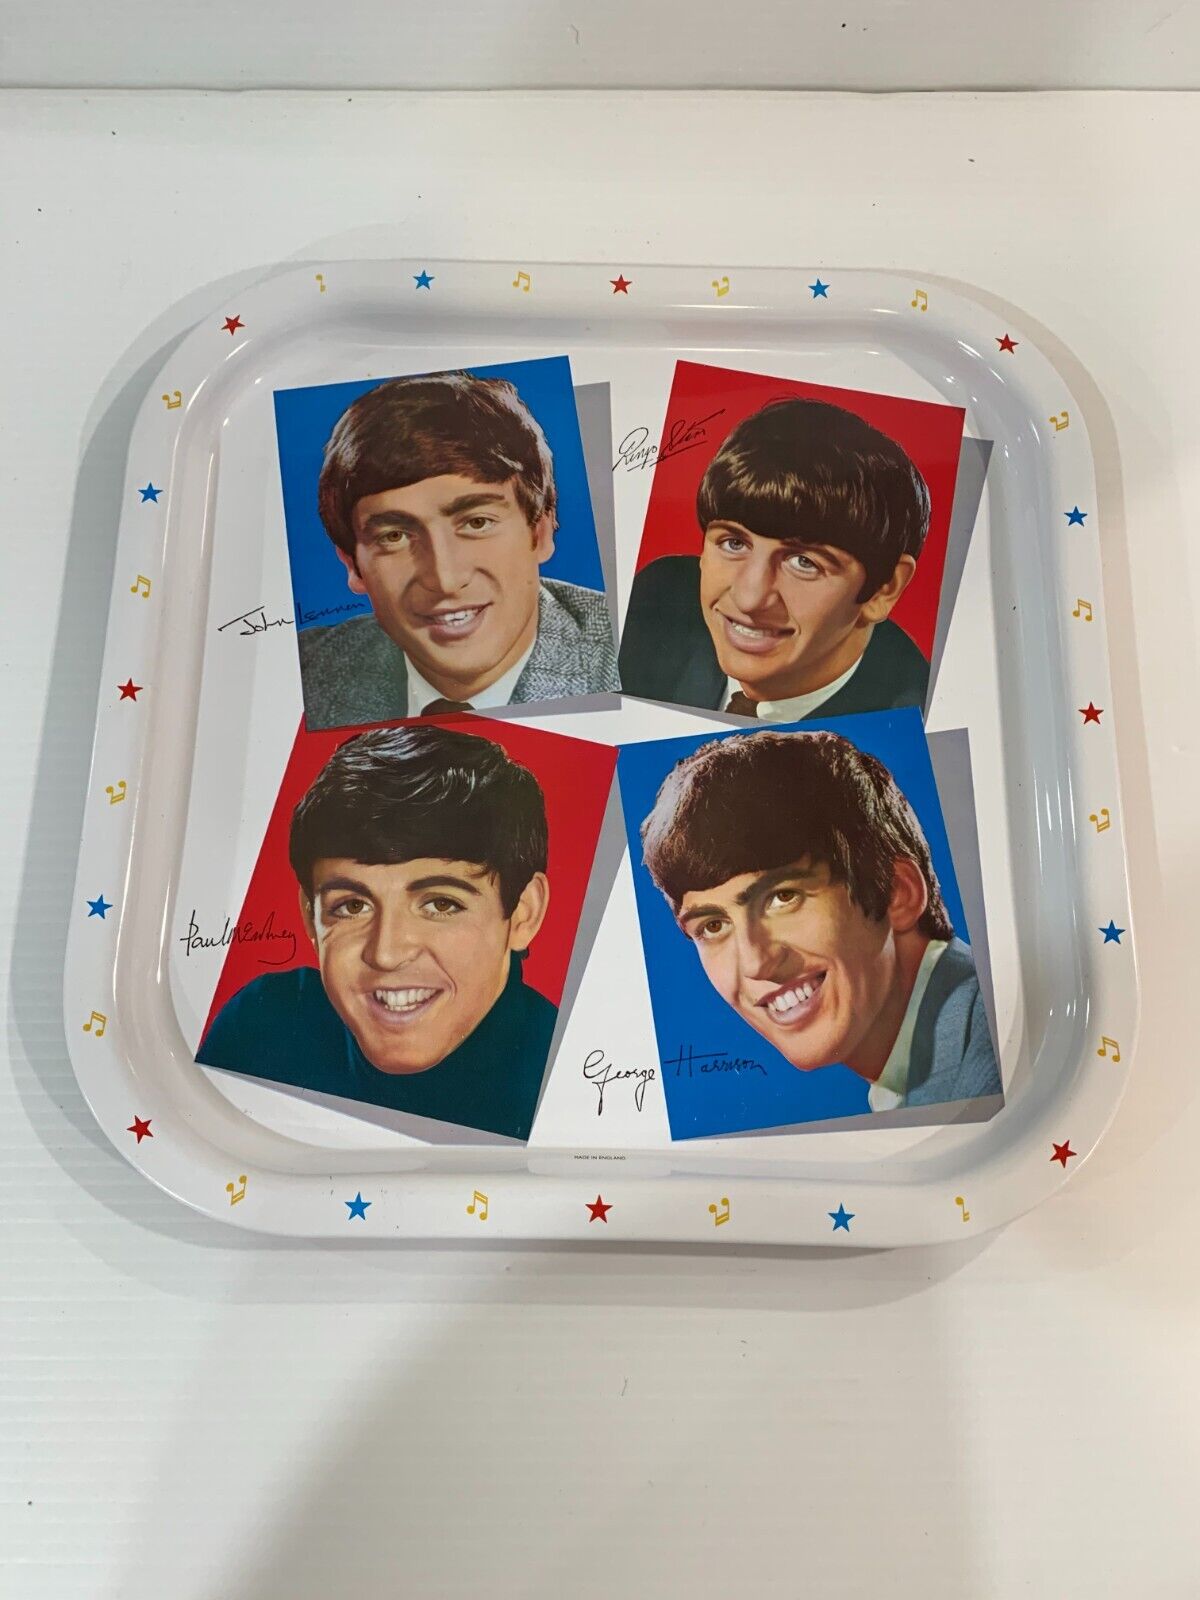 VINTAGE 1964 BEATLES MADE IN ENGLAND METAL SERVING TRAY - WORCESTER WARE